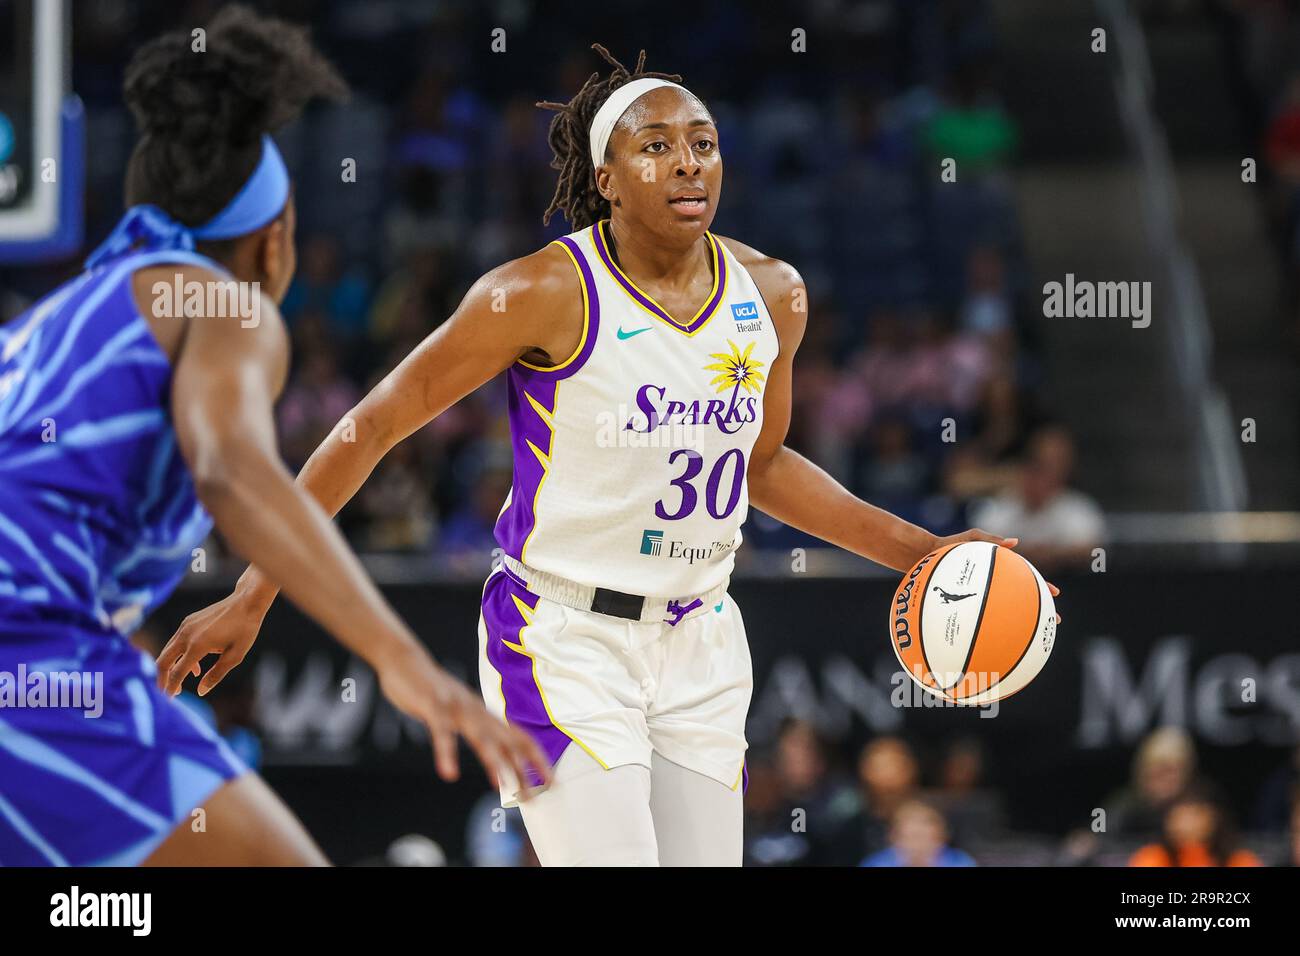 Chicago, USA. 28th June, 2023. Chicago, USA, June 28, 2023: Nneka Ogwumike (30 Los Angeles Sparks) in action during the game between the Chicago Sky and Los Angeles Sparks on Wednesday June 28, 2023 at Wintrust Arena, Chicago, USA. (NO COMMERCIAL USAGE) (Shaina Benhiyoun/SPP) Credit: SPP Sport Press Photo. /Alamy Live News Stock Photo